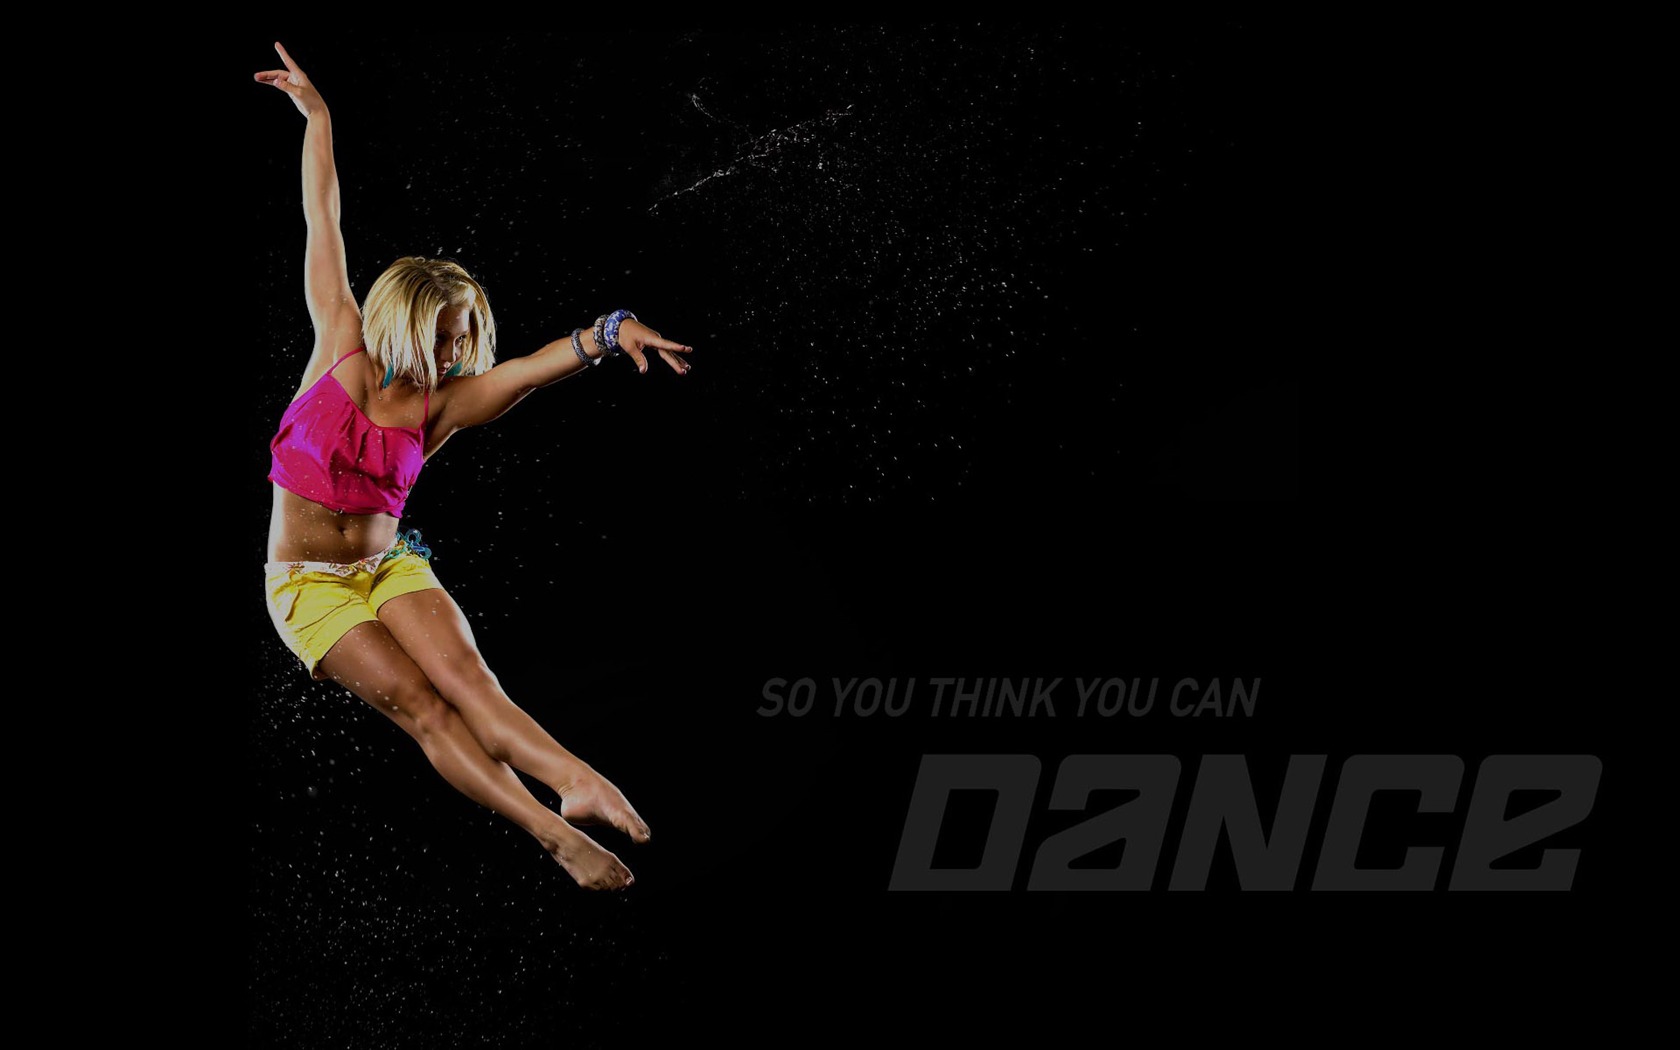 So You Think You Can Dance 舞林争霸 壁纸(一)5 - 1680x1050